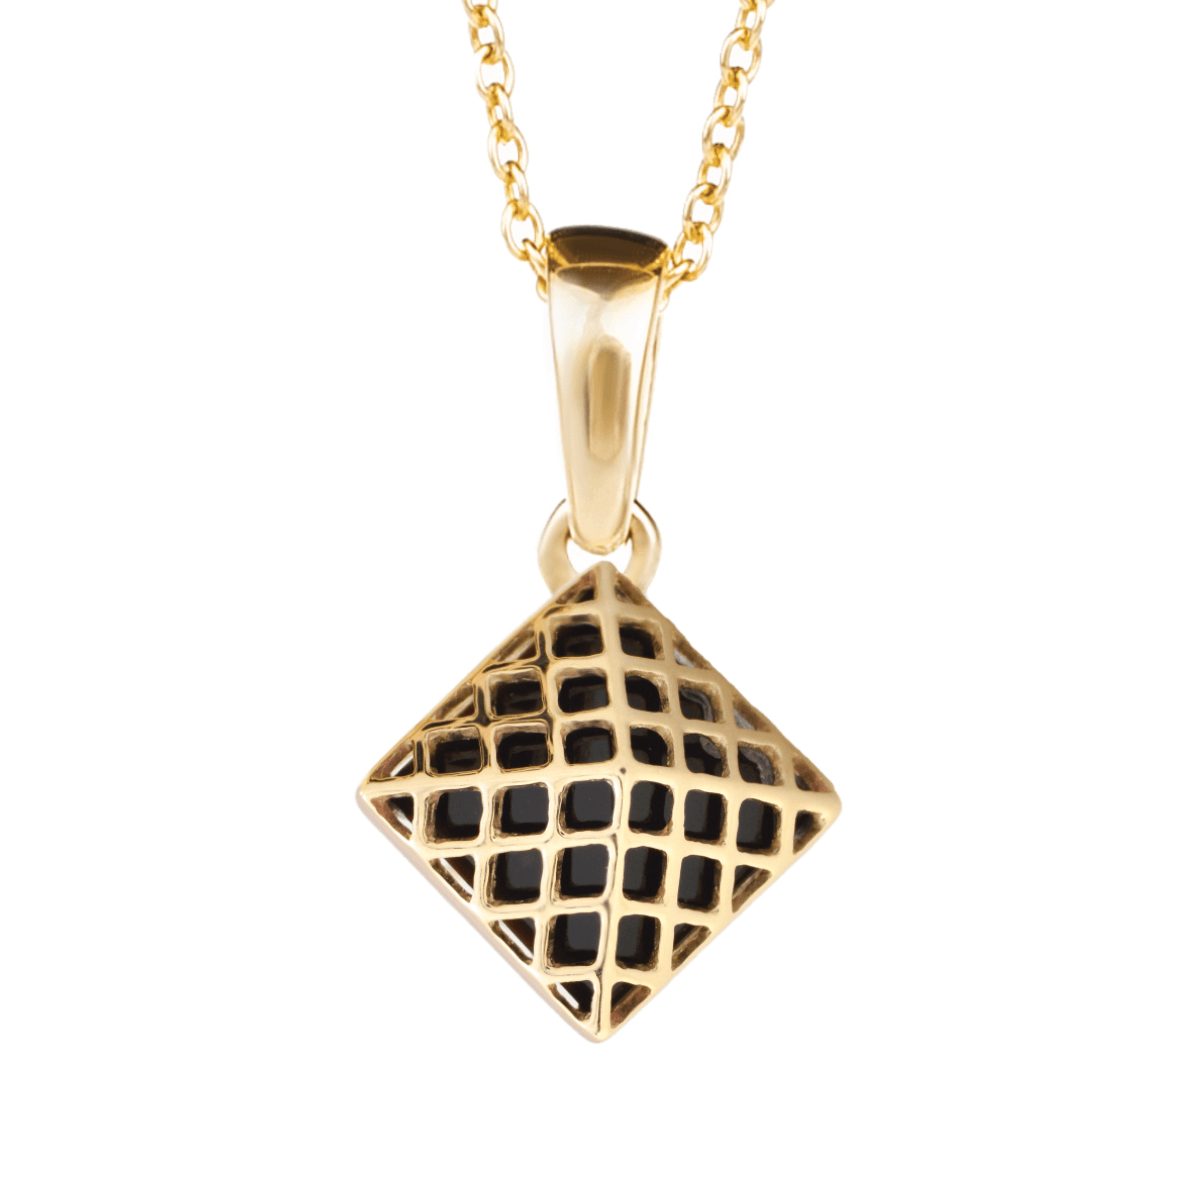 Gold pendant with onyx in the form of a pyramid on a light background.